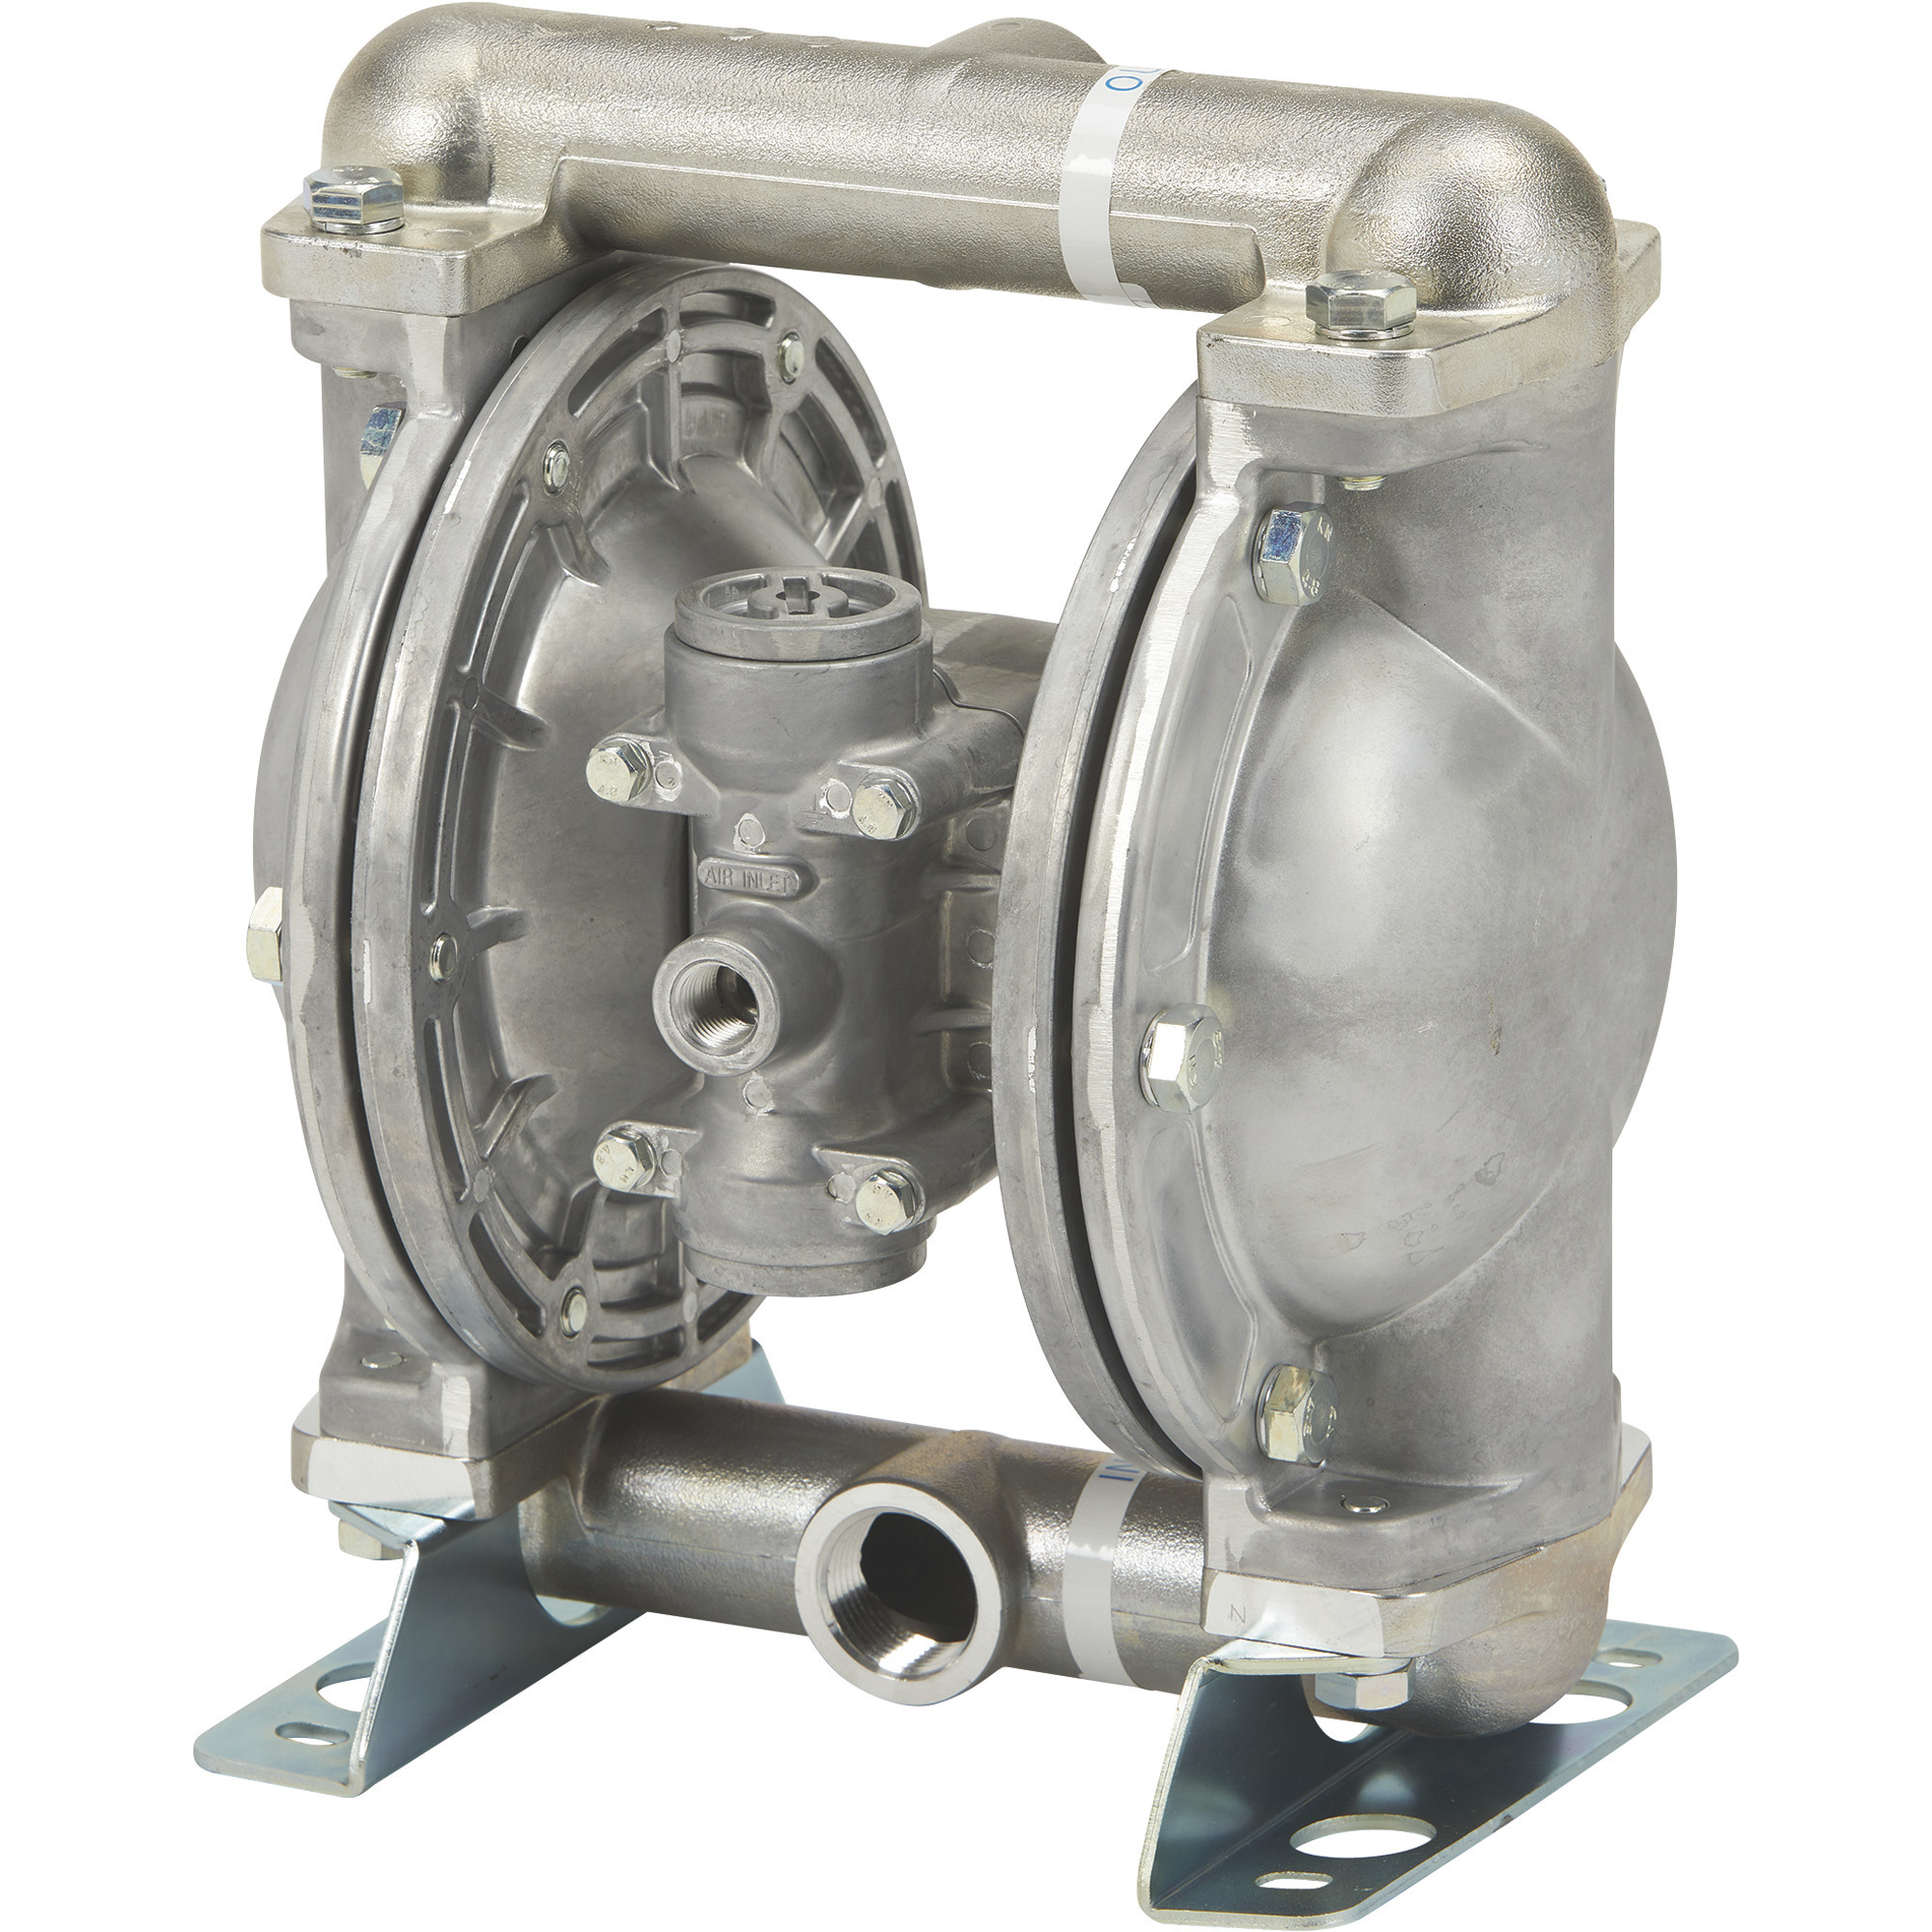 Roughneck Air-Operated Double Diaphragm Pump, 24 GPM, 1Inch Inlet and Outlet